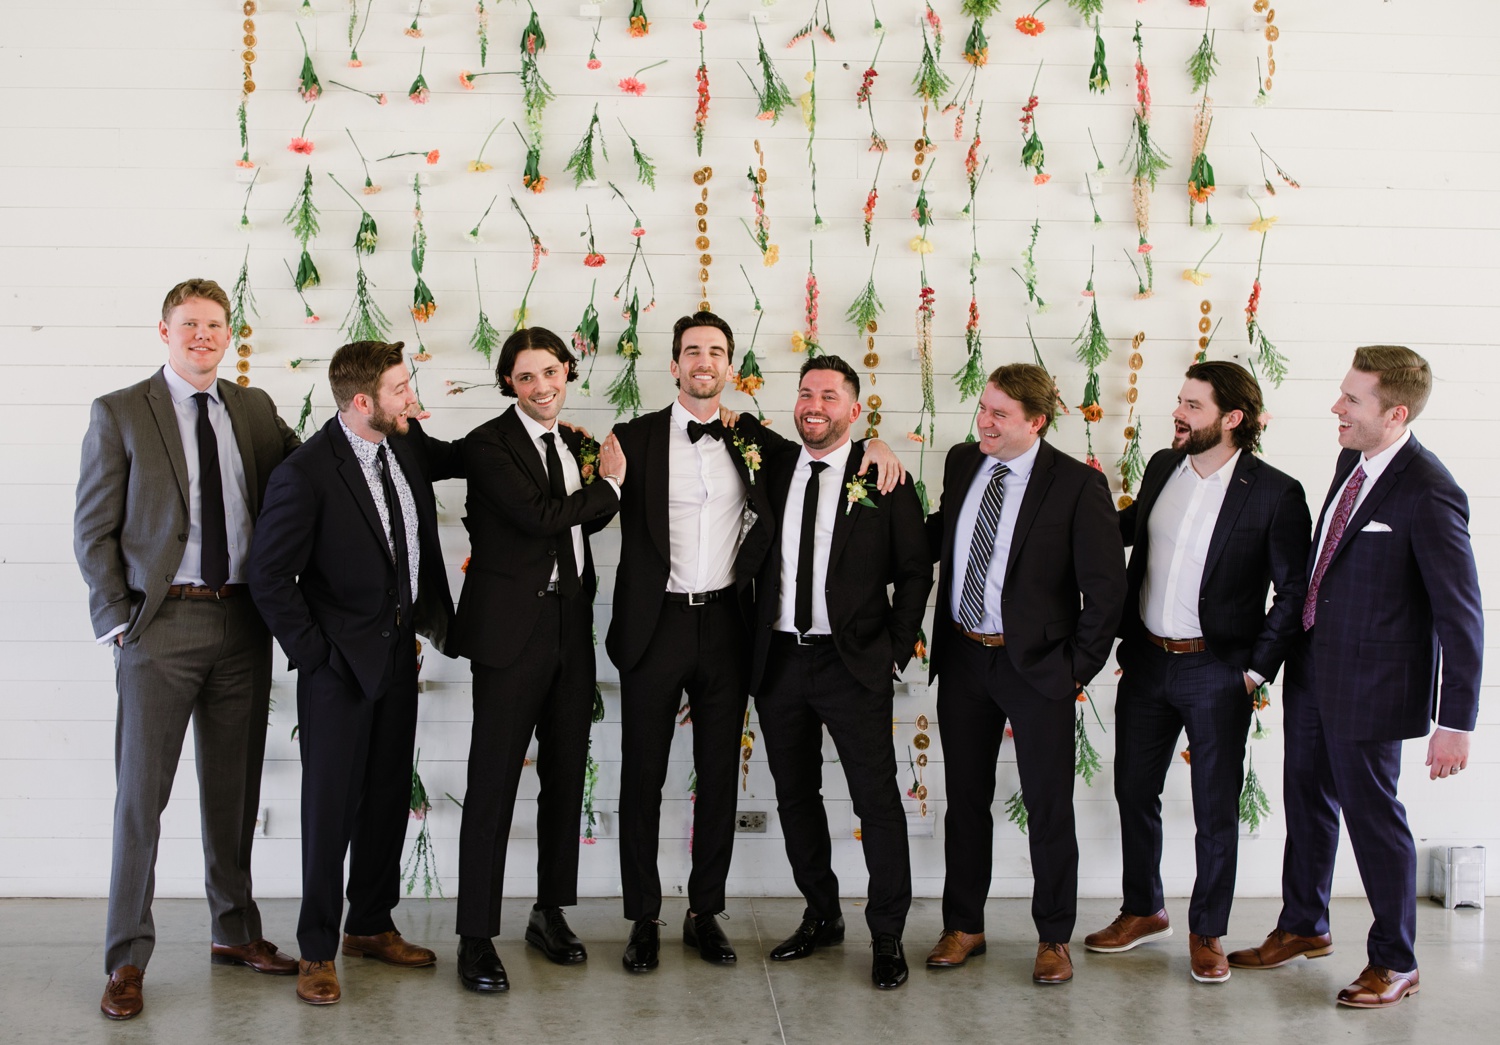 Bridal party portraits at Prospect House